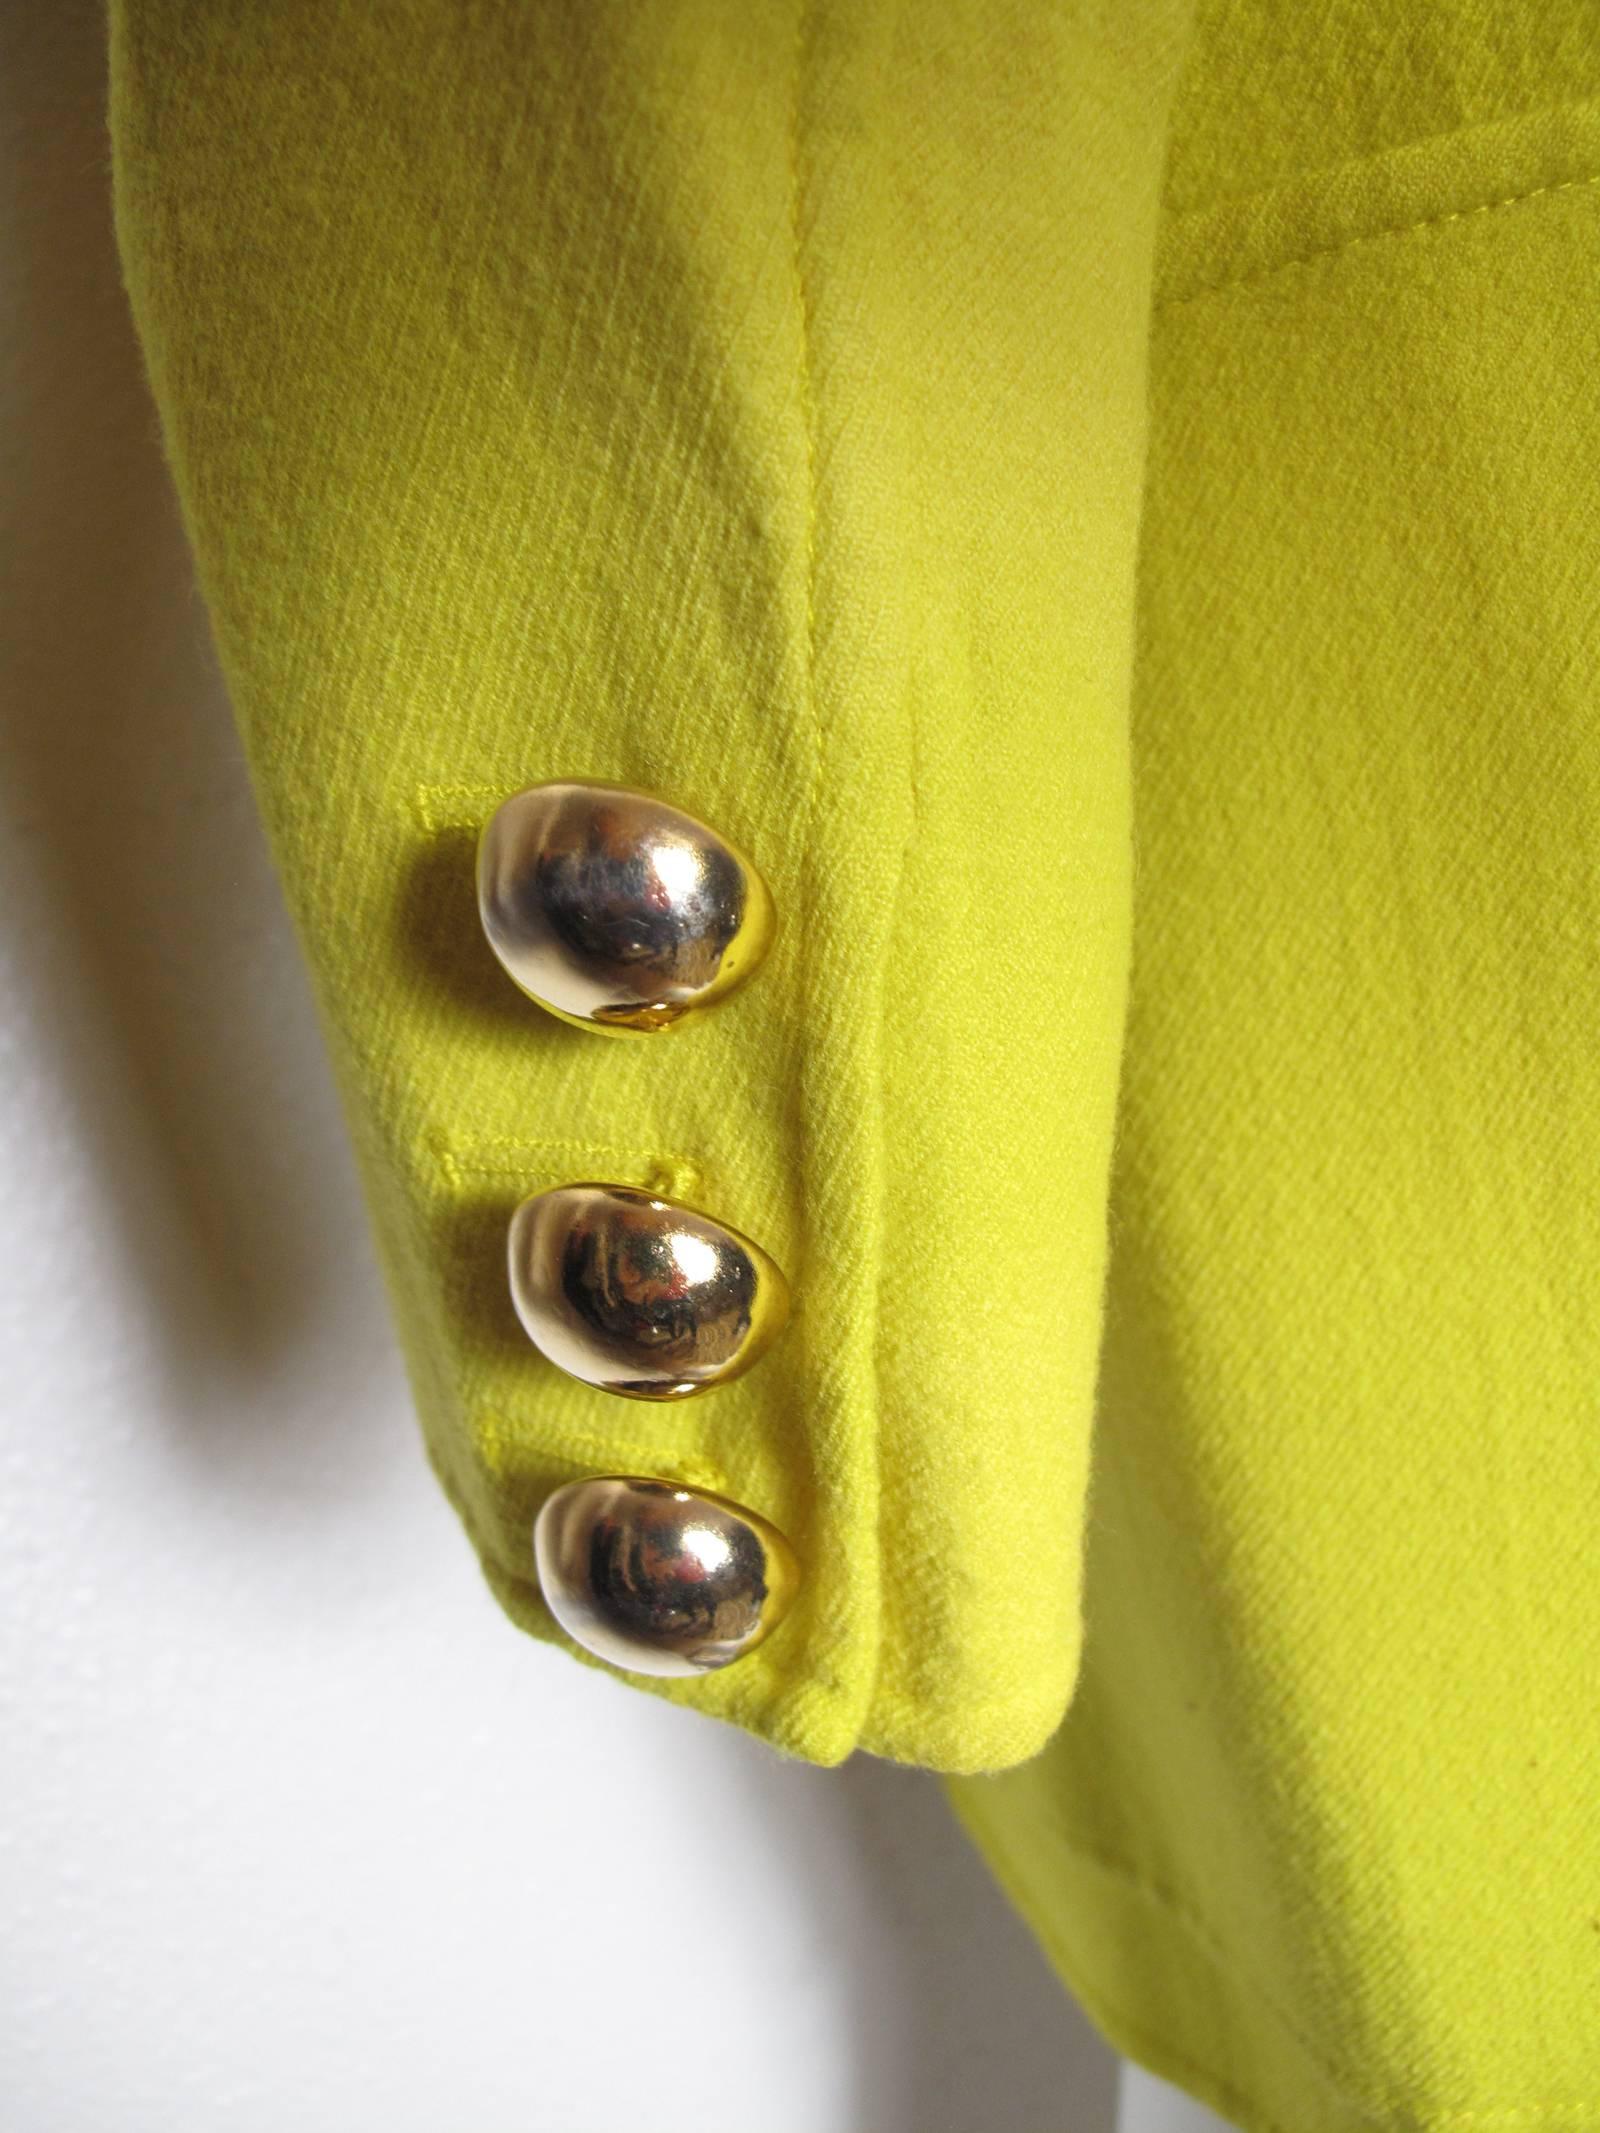 Christian Lacroix bright yellow wool blazer with large gold buttons.  Condition: Excellent.  Size Large
We accept returns for refund, please see our terms.  We offer free ground shipping within the US.  Please let us know if you have any questions.